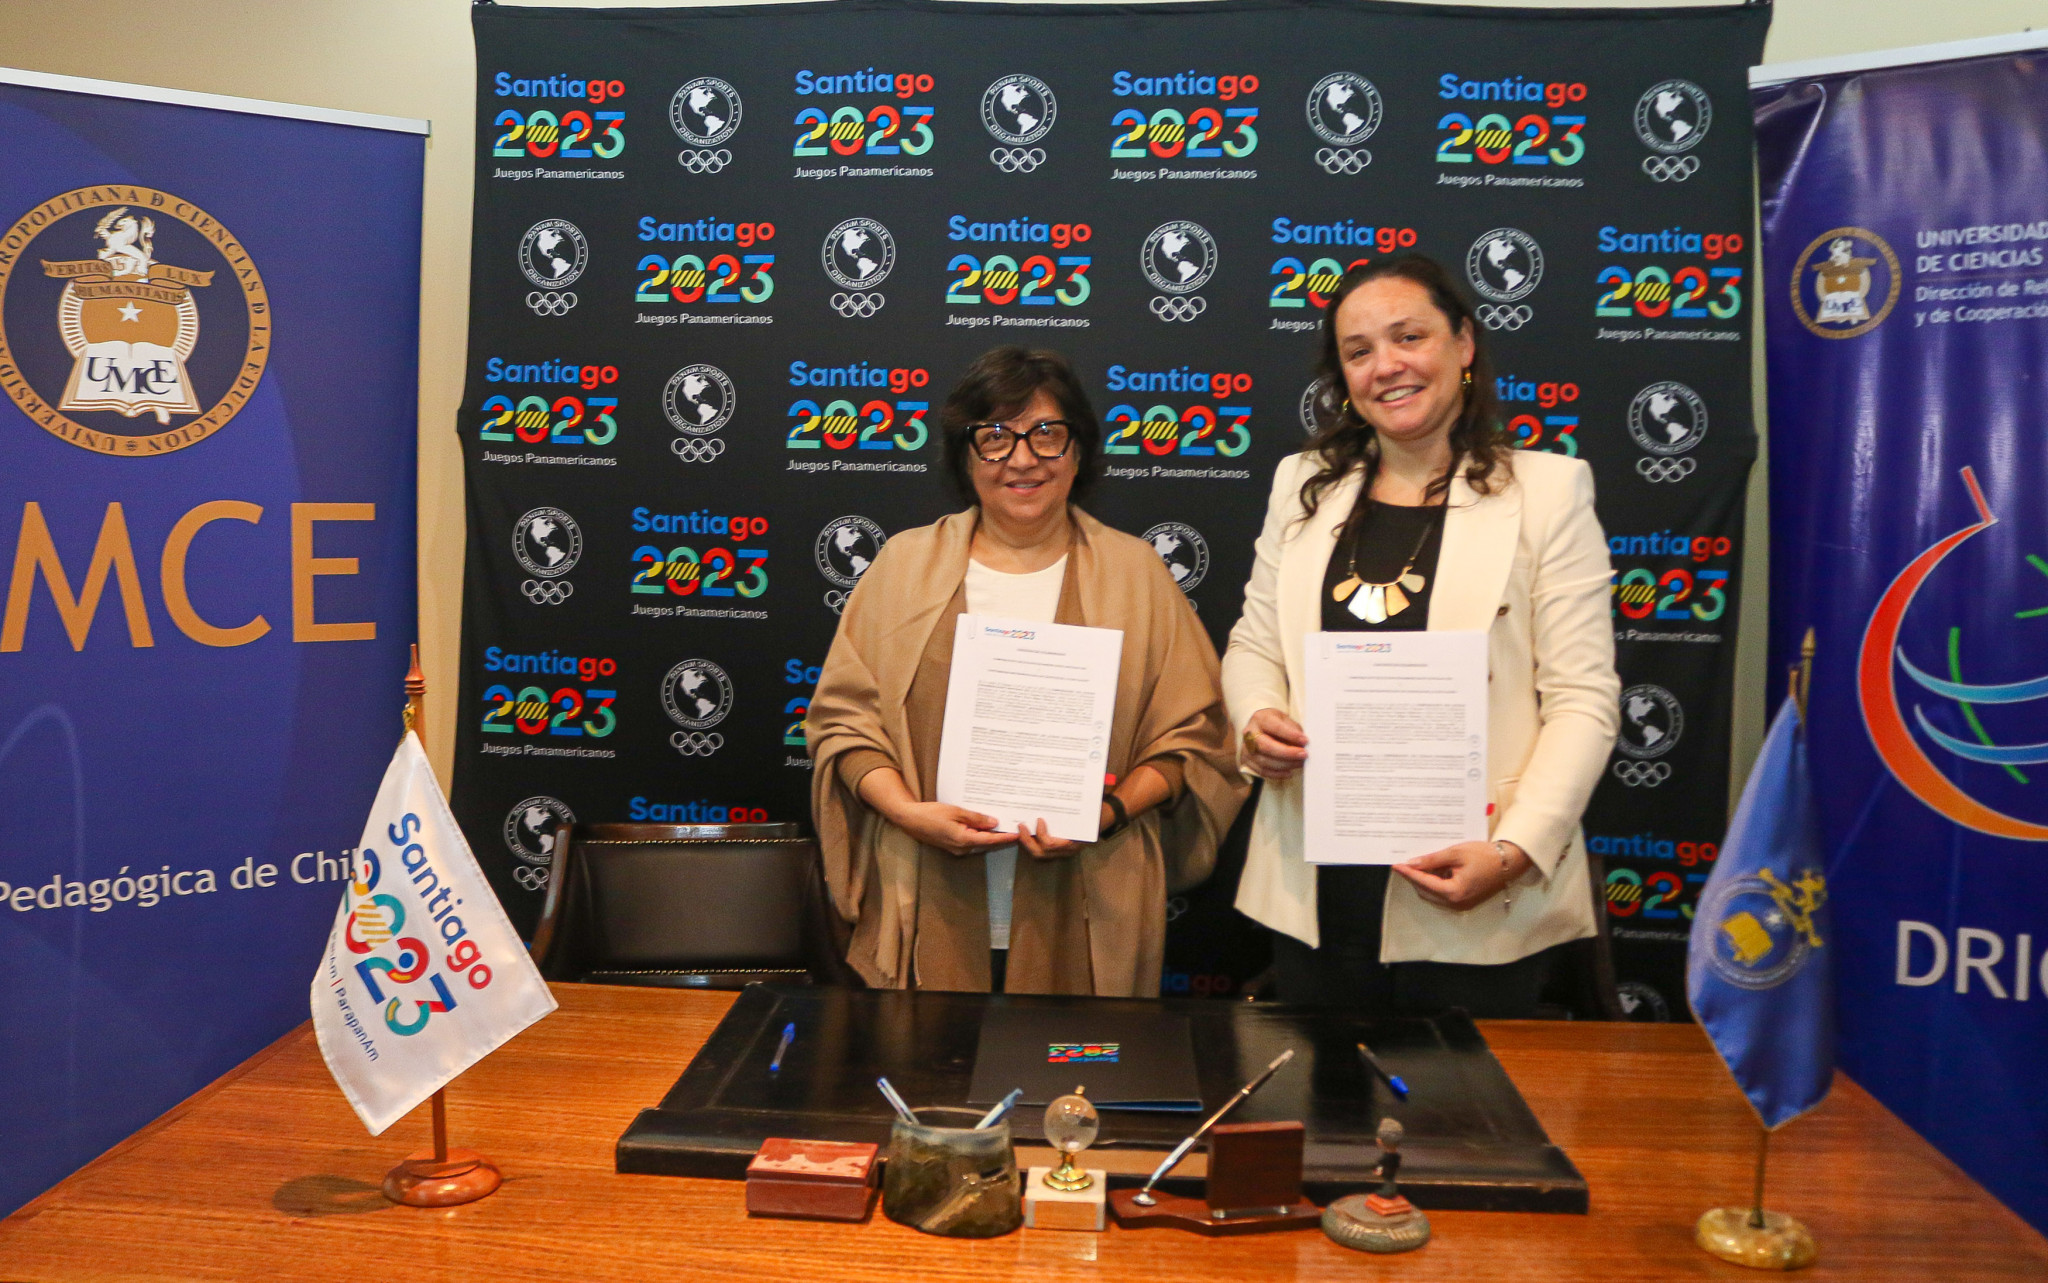 Santiago 2023 and the Metropolitan University of Educational Sciences are to cooperate in the field of volunteering ©Twitter/Santiago2023